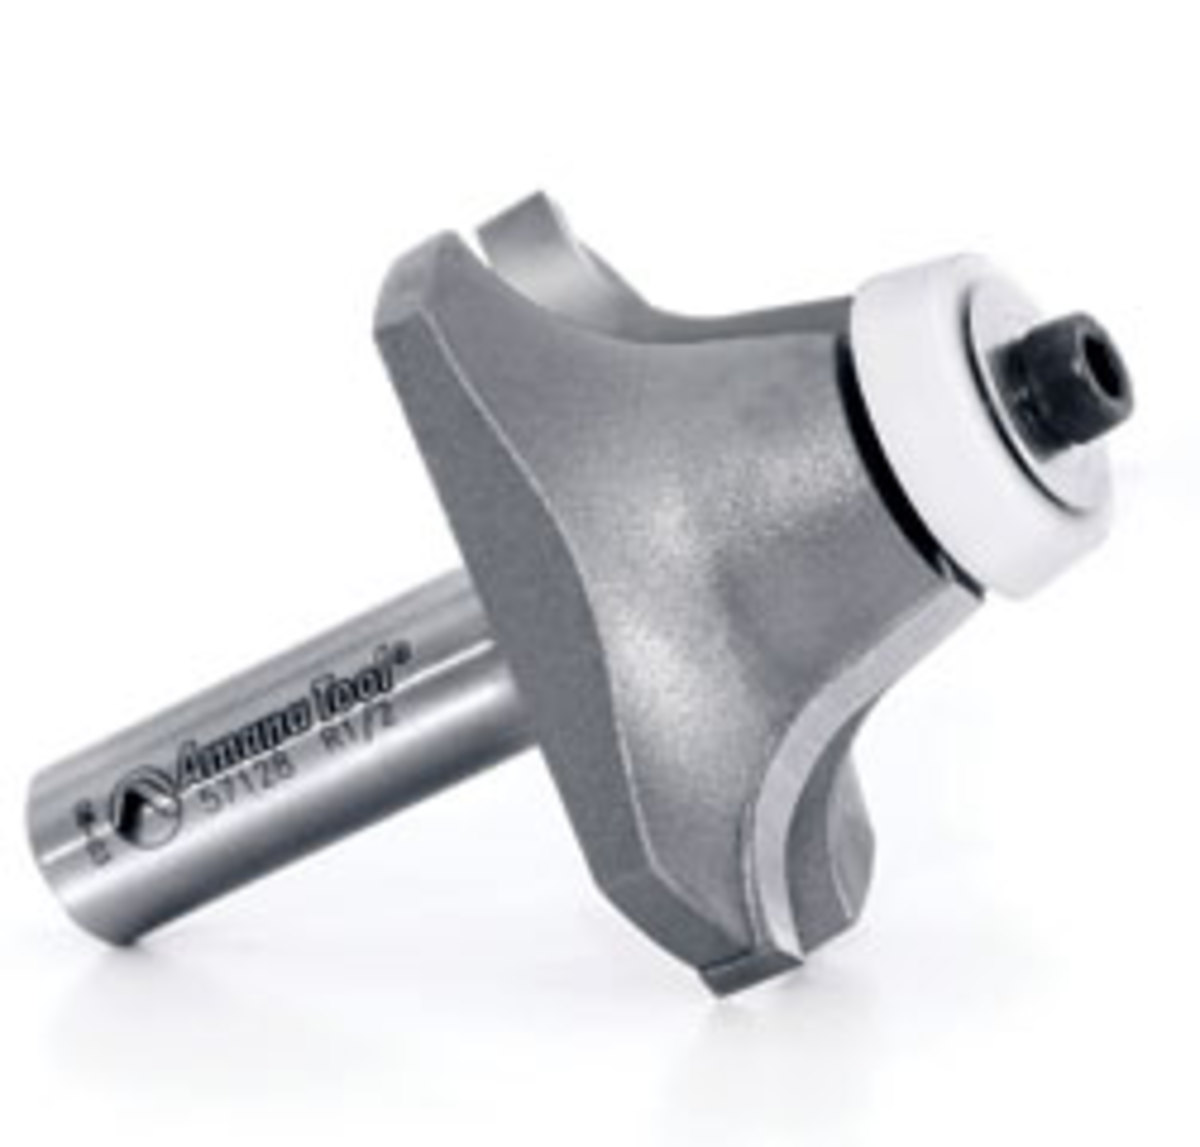 Amana Tool's undermount router bits include roundover, ogee and bevel profiles.